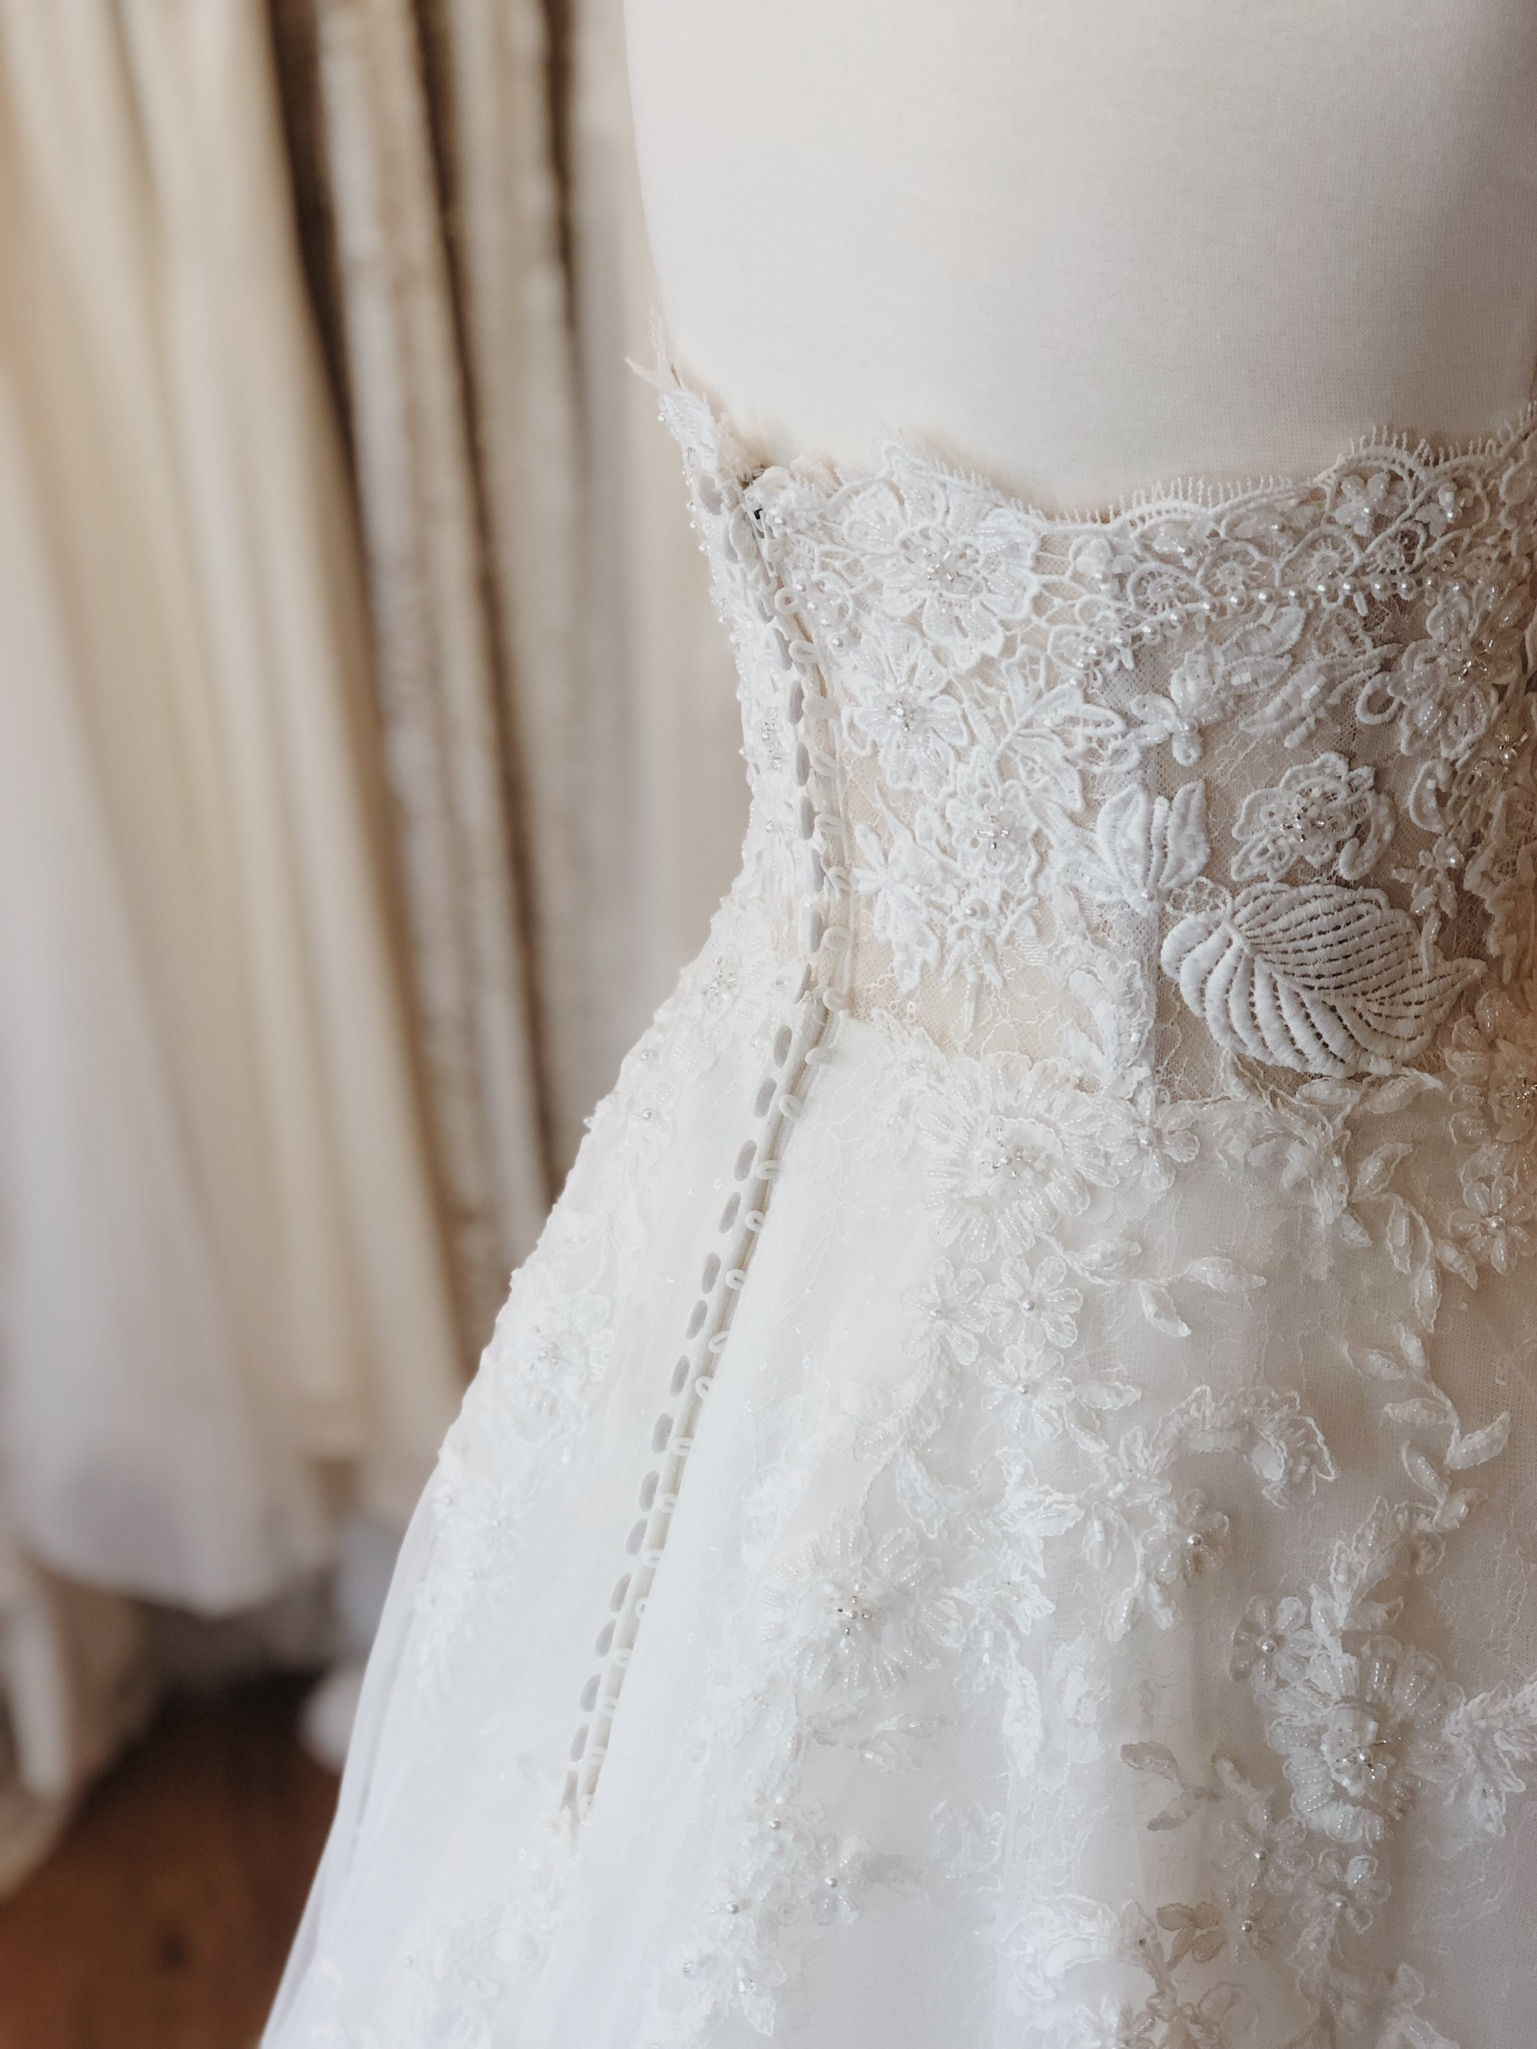 All about the Bridal Gown Details! - Fabulous Frocks Bridal